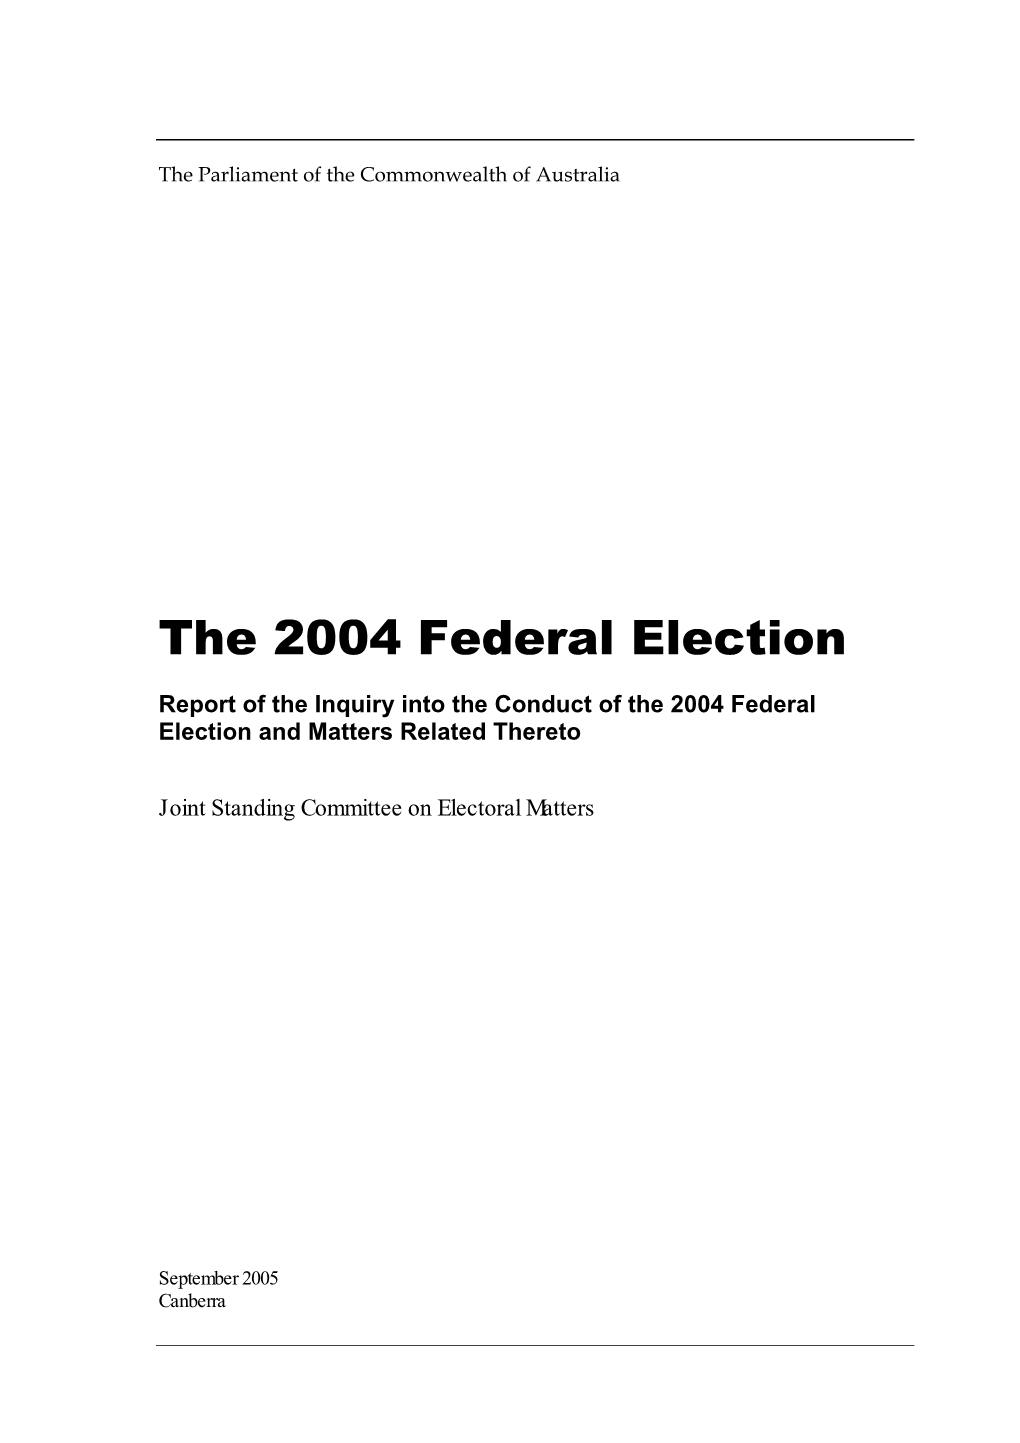 The 2004 Federal Election